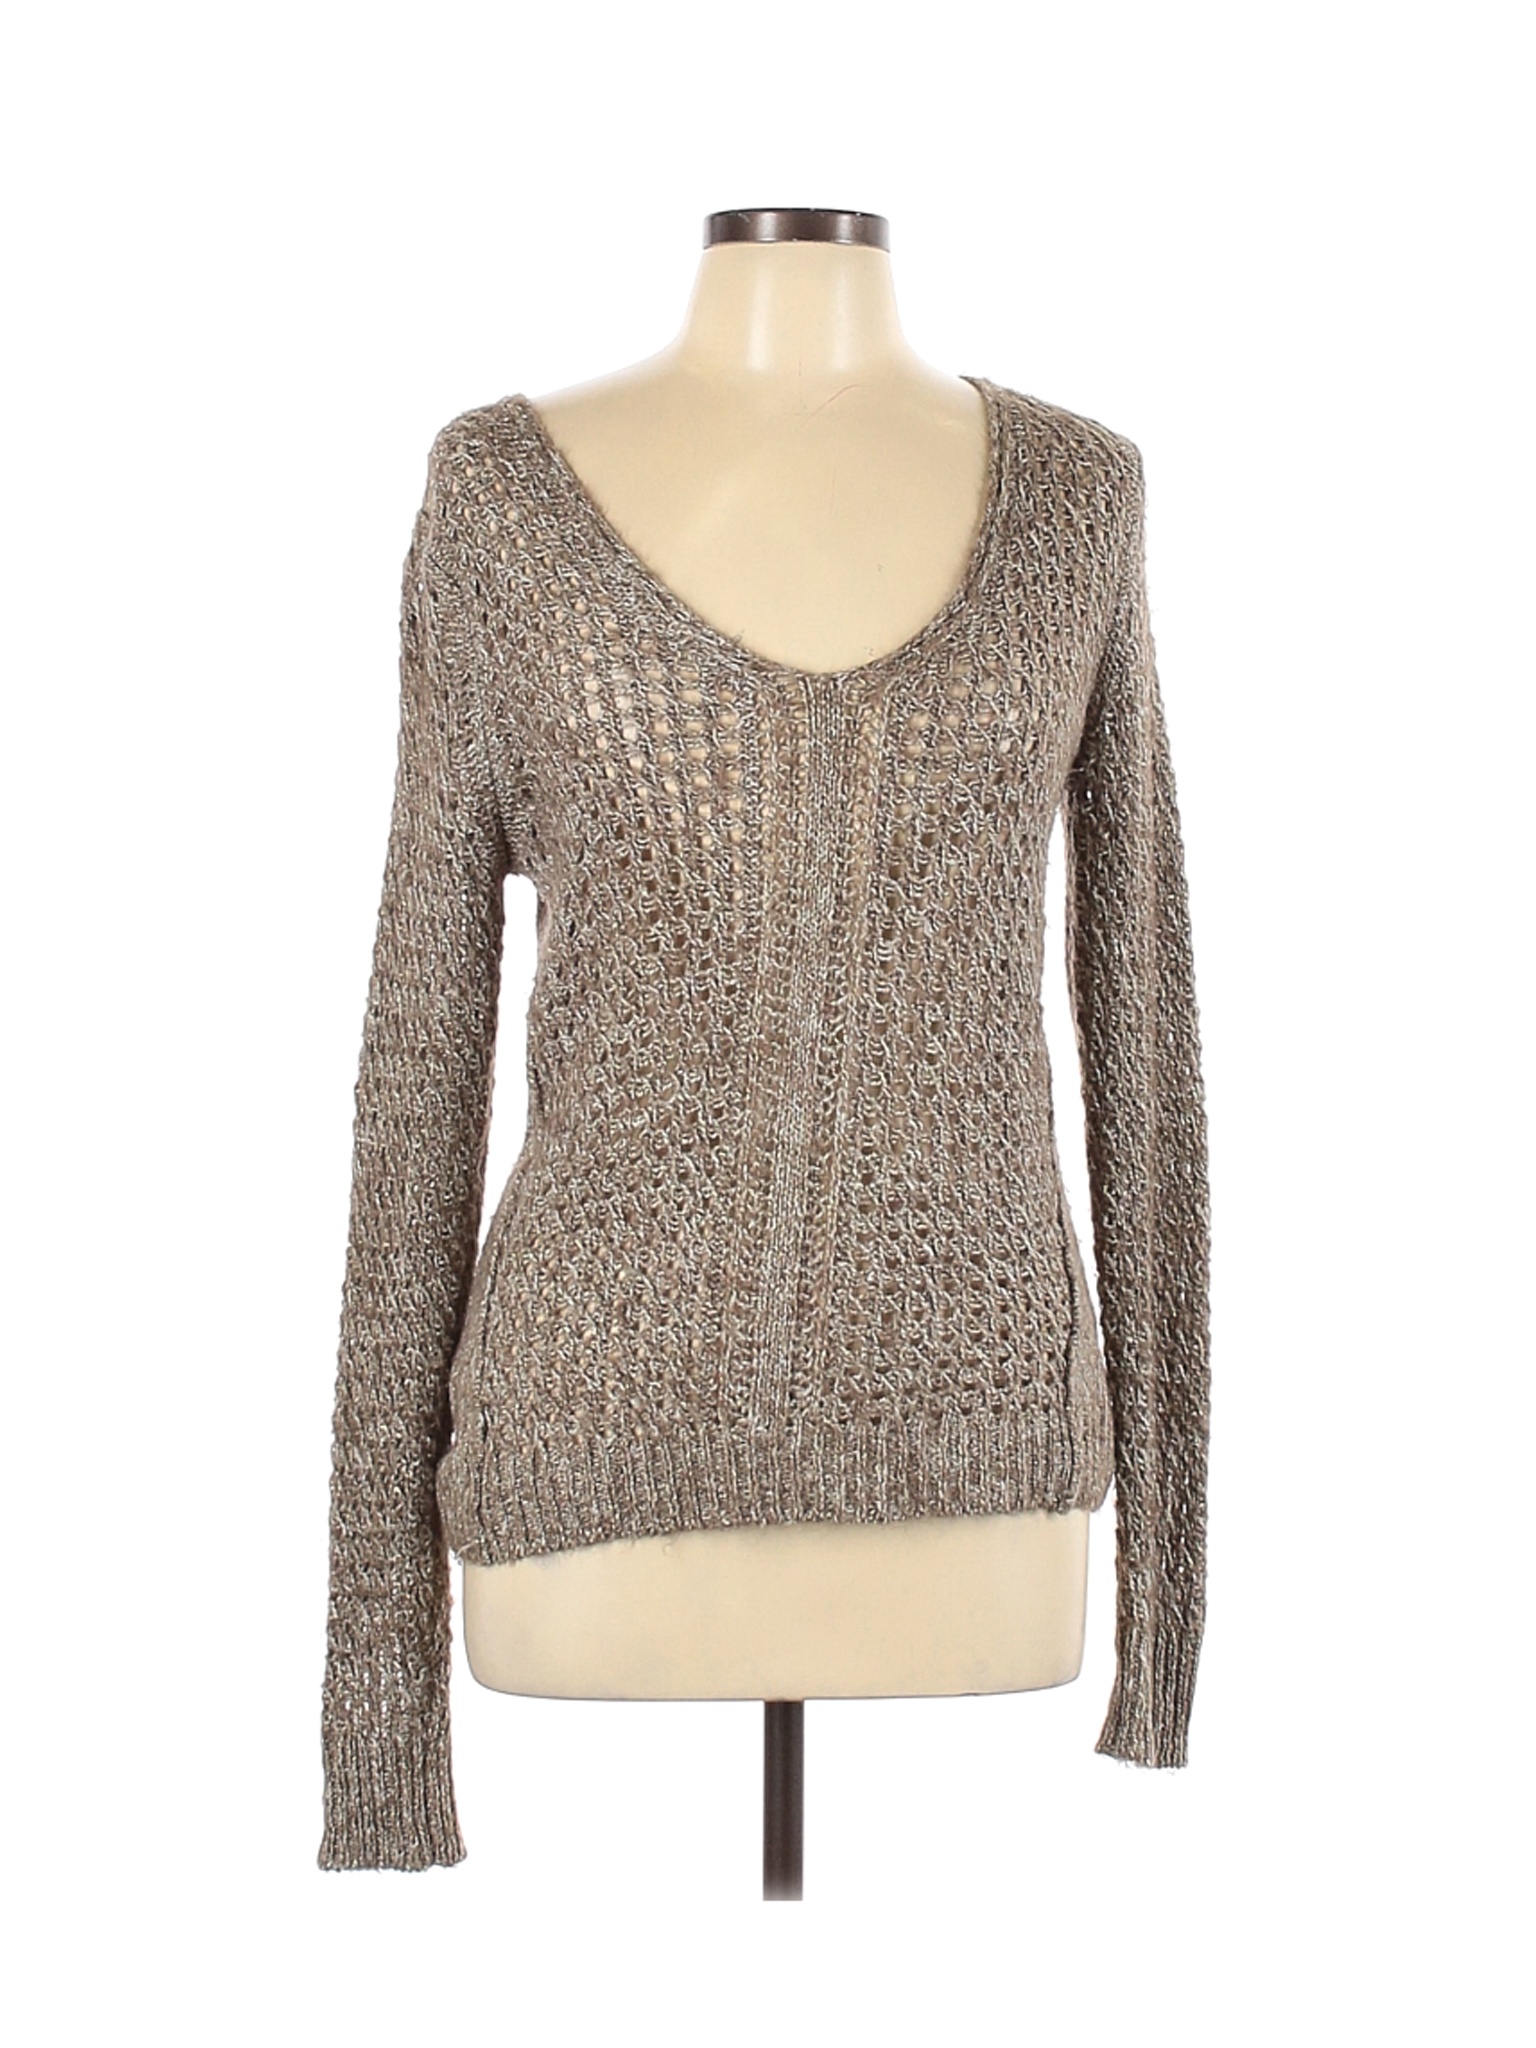 Maurices Women Brown Pullover Sweater L | eBay